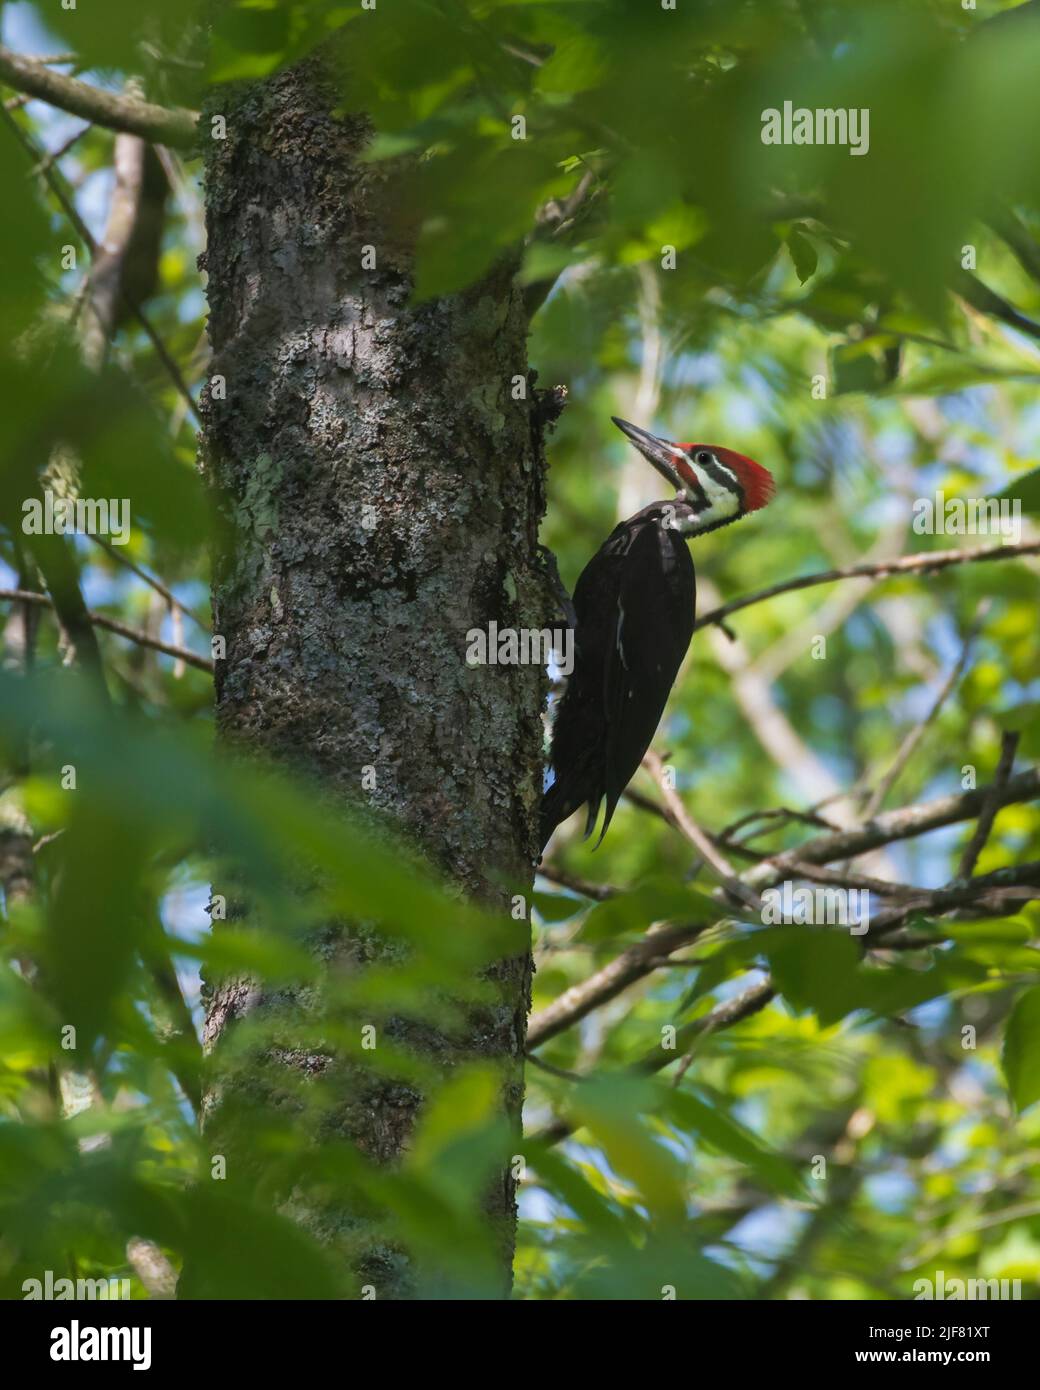 Pileated woodpecker, Dryocopus pileatus, largest North American woodpecker, male indicated by red line from bill to throat. Stock Photo